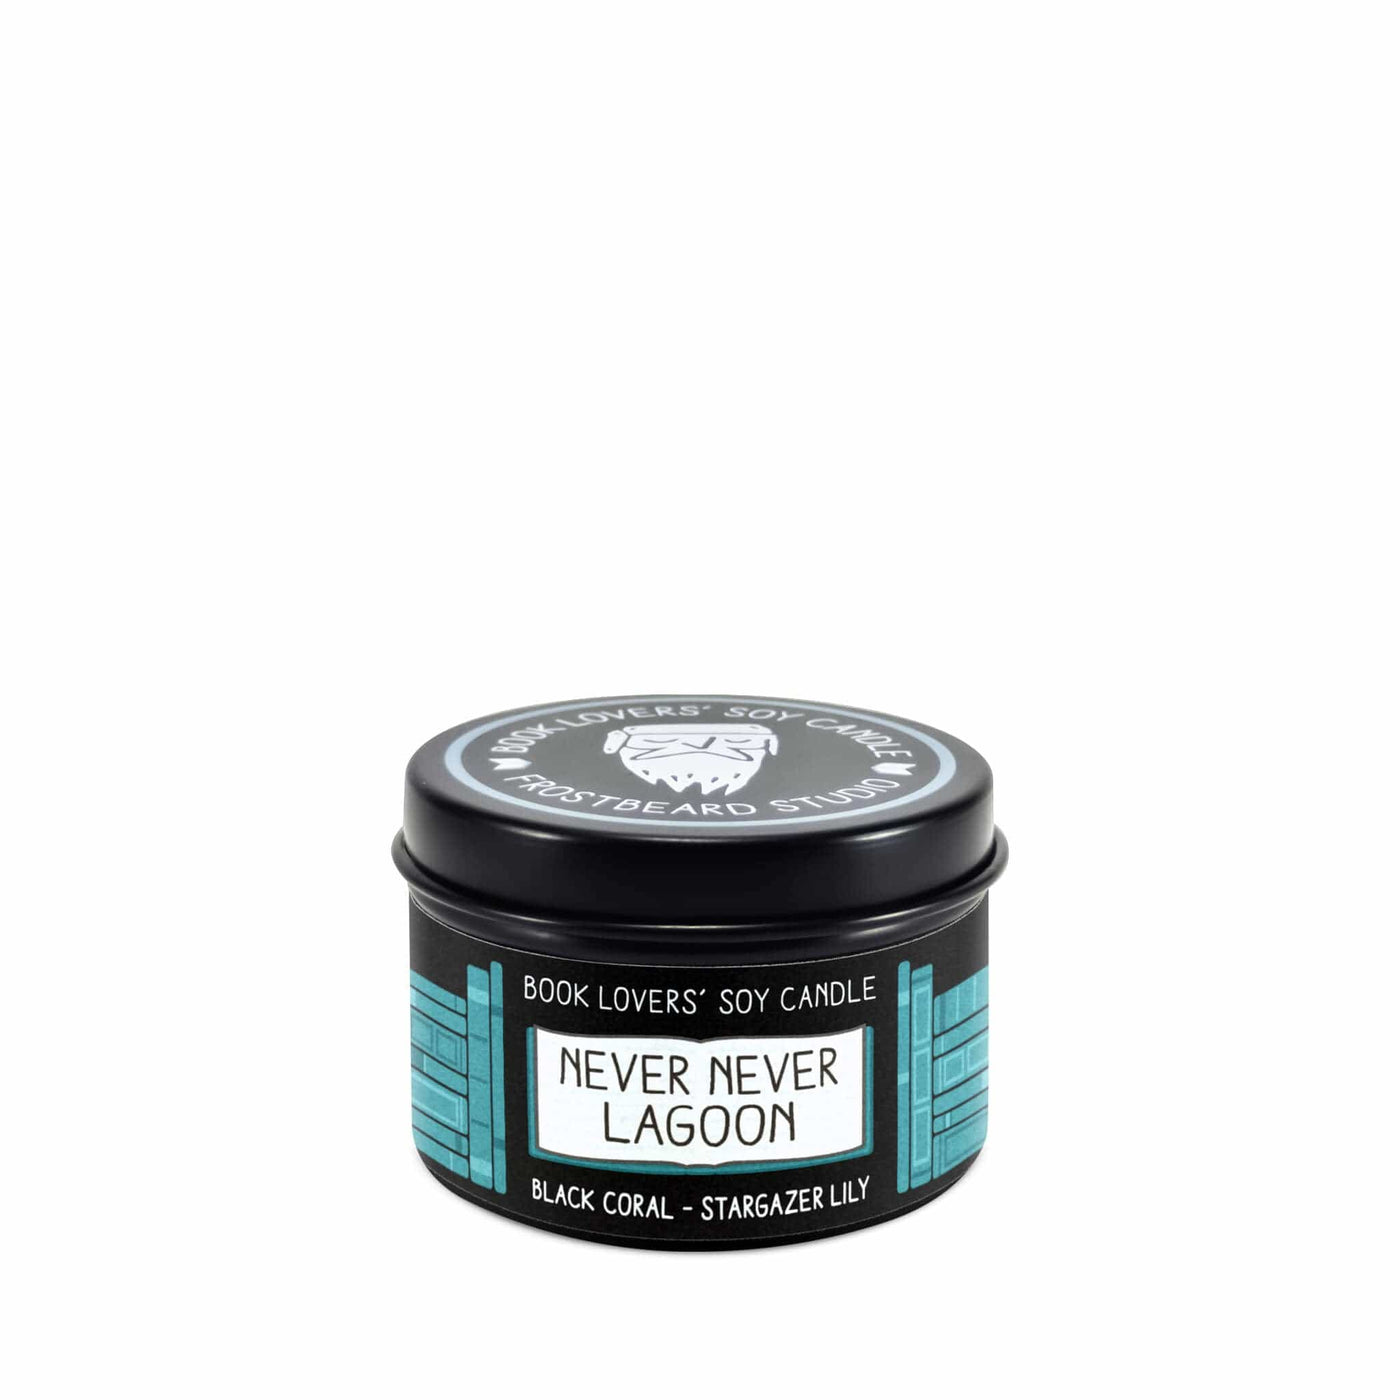 Never Never Lagoon - 2 oz Tin - Book Lovers' Soy Candle - Frostbeard Studio